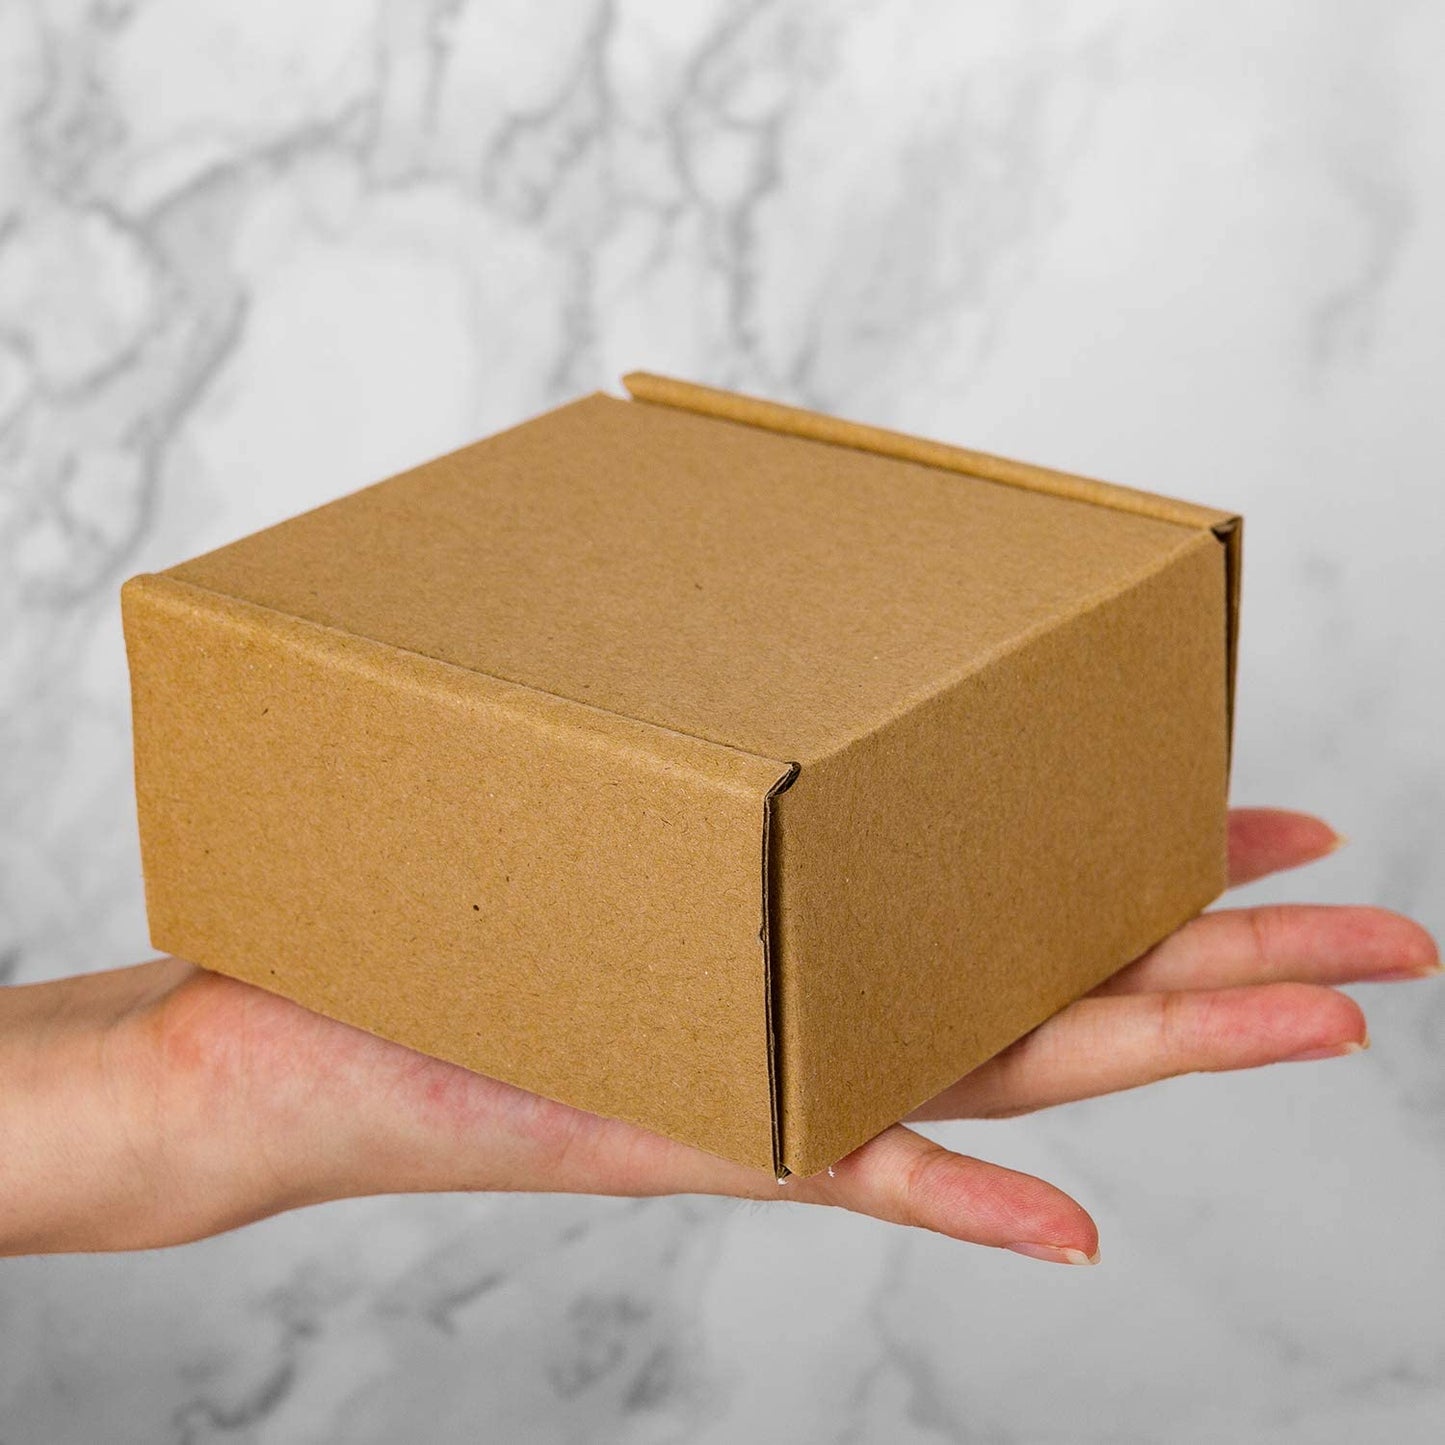 WRAPLA Recyclable Corrugated Box Mailers - Cardboard Box Perfect for Shipping Small -10 X 10 X 5 CM - 50 Pack - Kraft